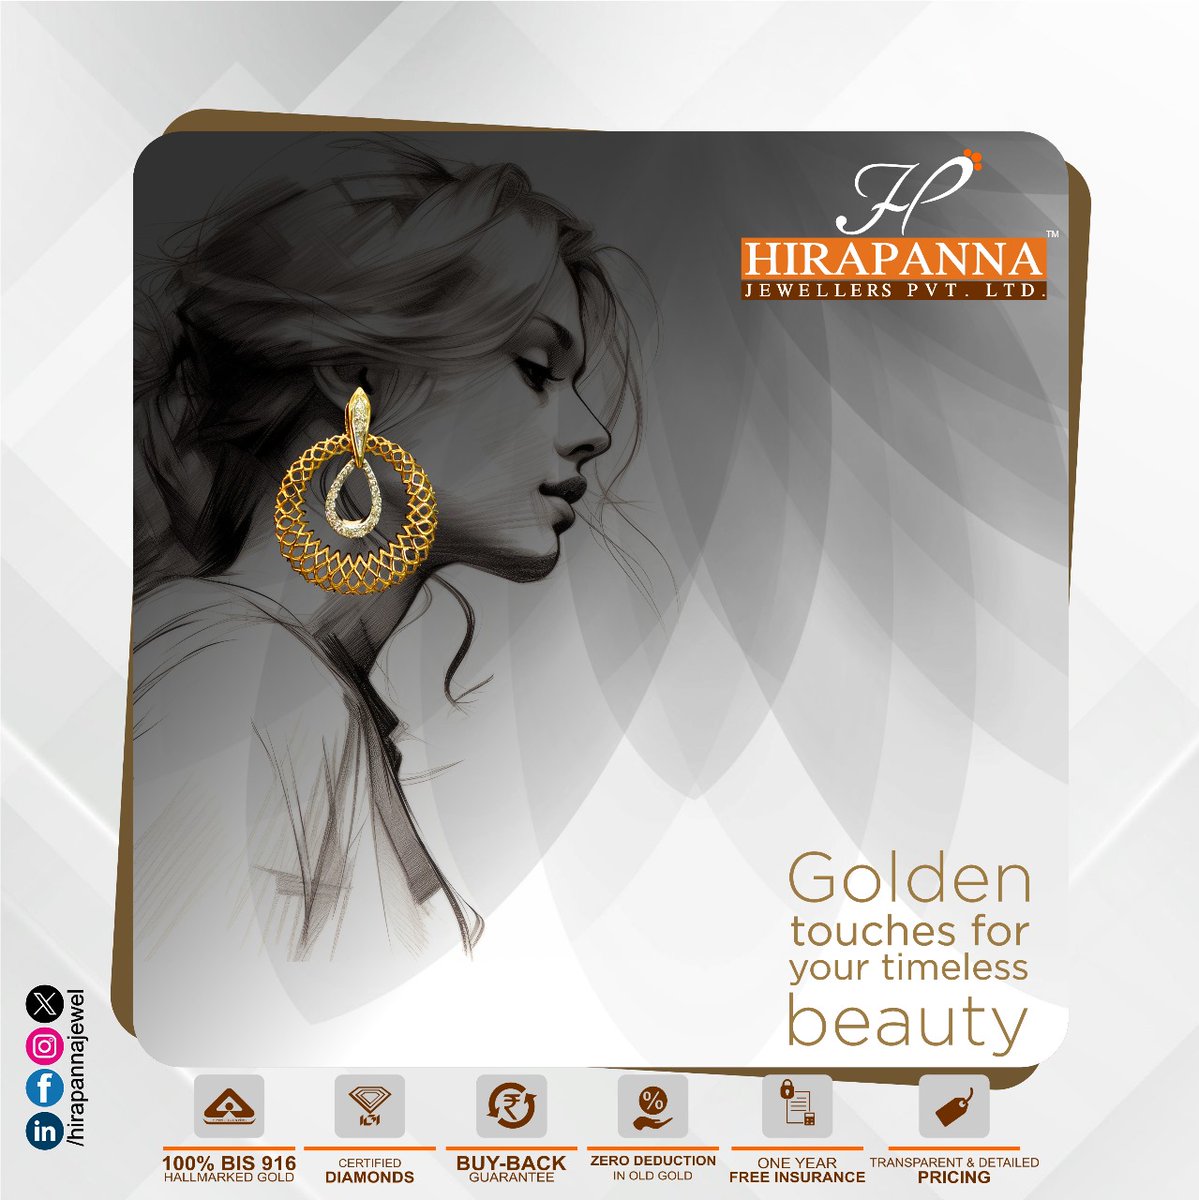 Golden touches for your timeless beauty 
.
.

#goldjewellery #timelessbeauty
#hirapannajewels #hpj #goldchoker #chockers #hirapanna #hirapannajewellers #goldearings #goldjewel #goldforyou #designercollection #designerjewellery #bewowindia